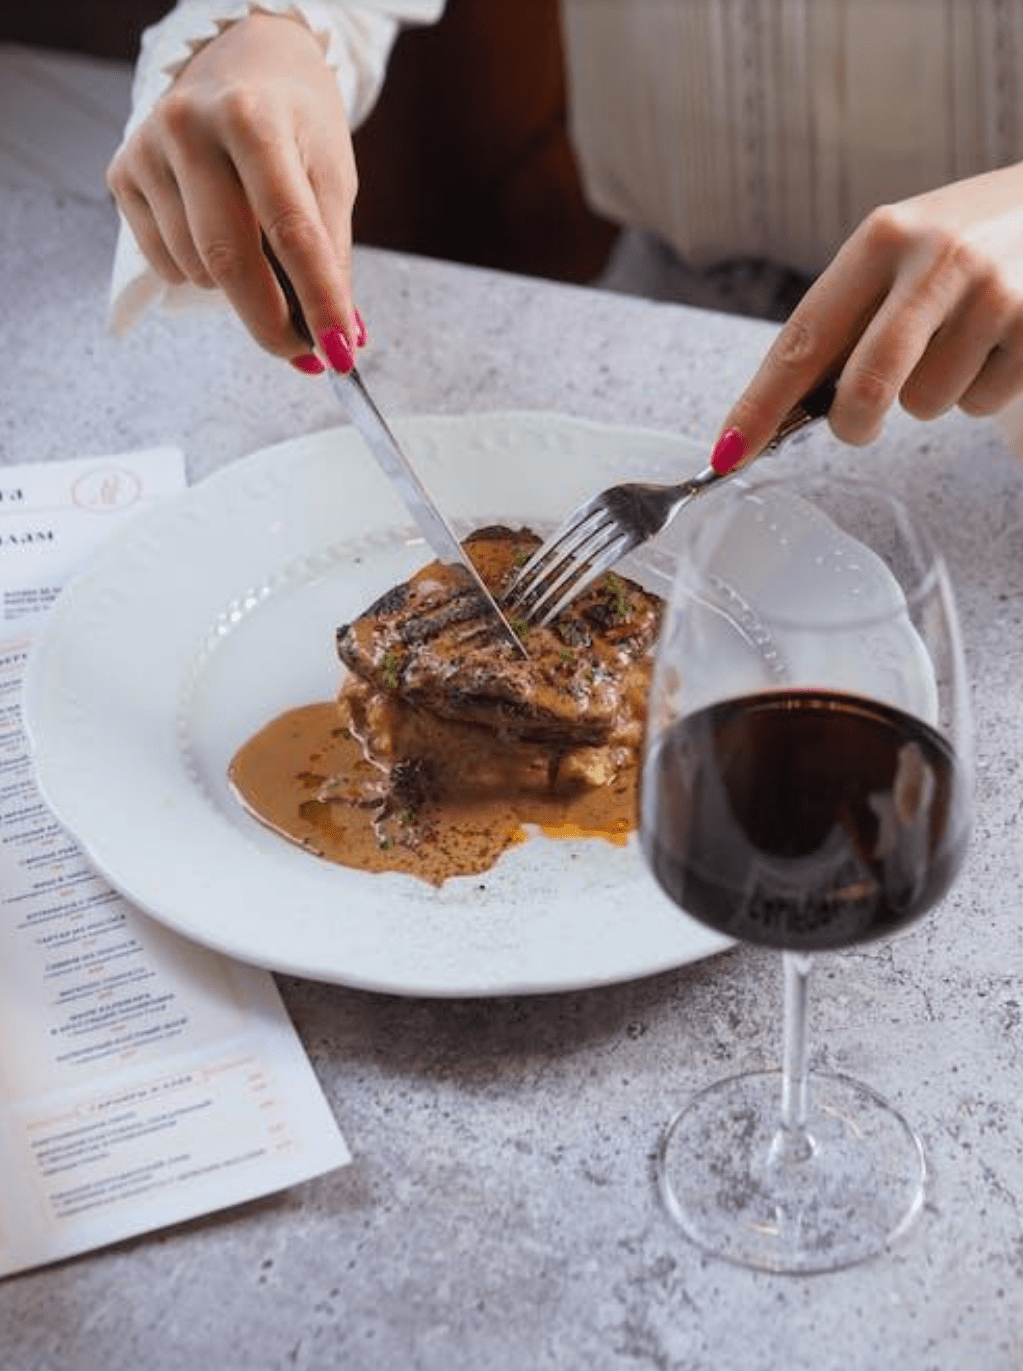 A person cutting through a steak with a glass of red wine next to the plate